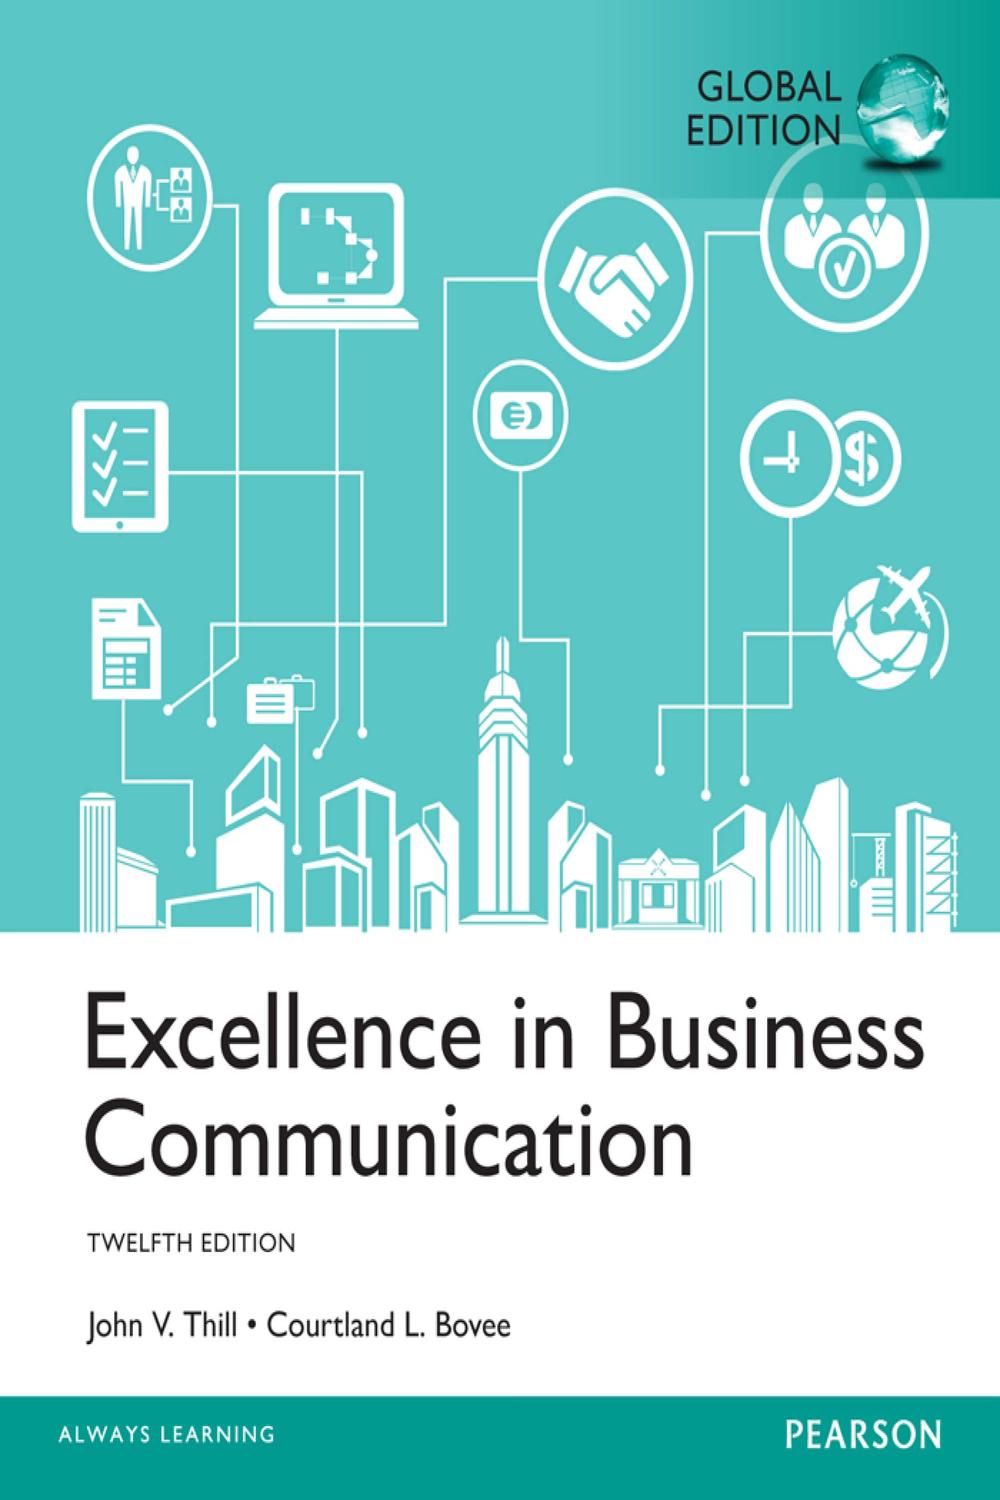 Excellence in business communication pdf download free app to download videos